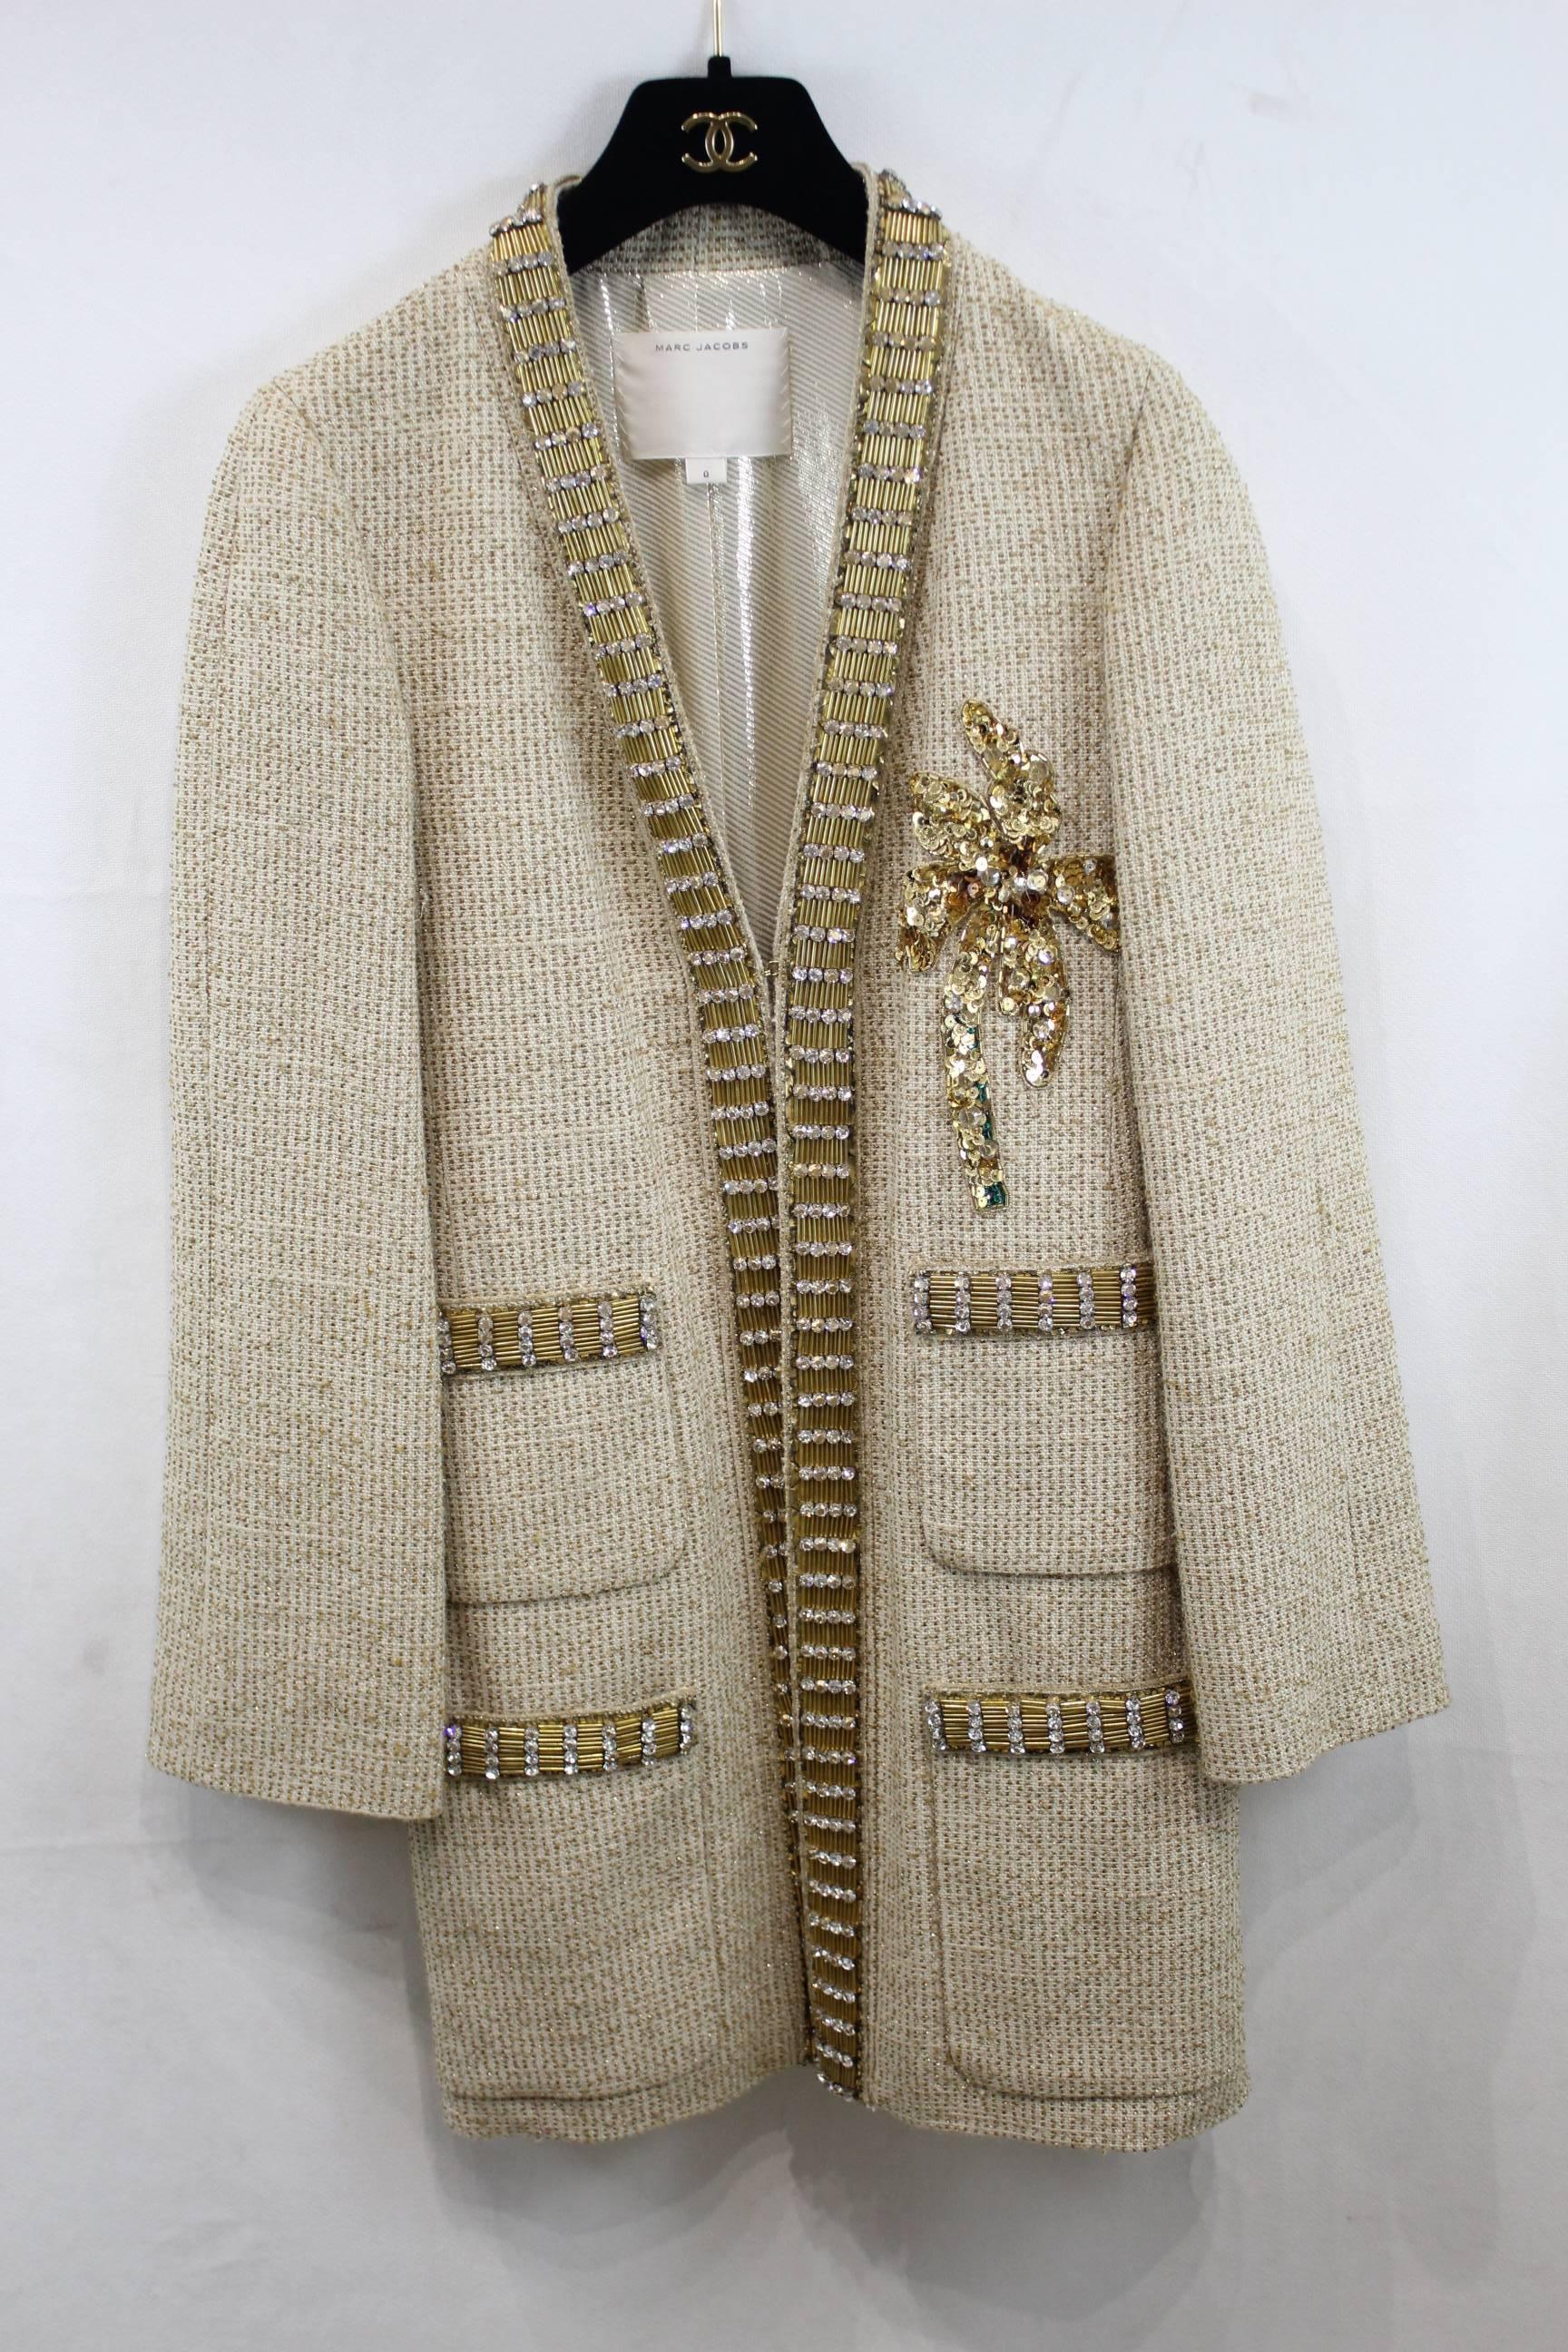 Women's Marc Jacobs Golden Jacket with amazing broosery work. Size US 0